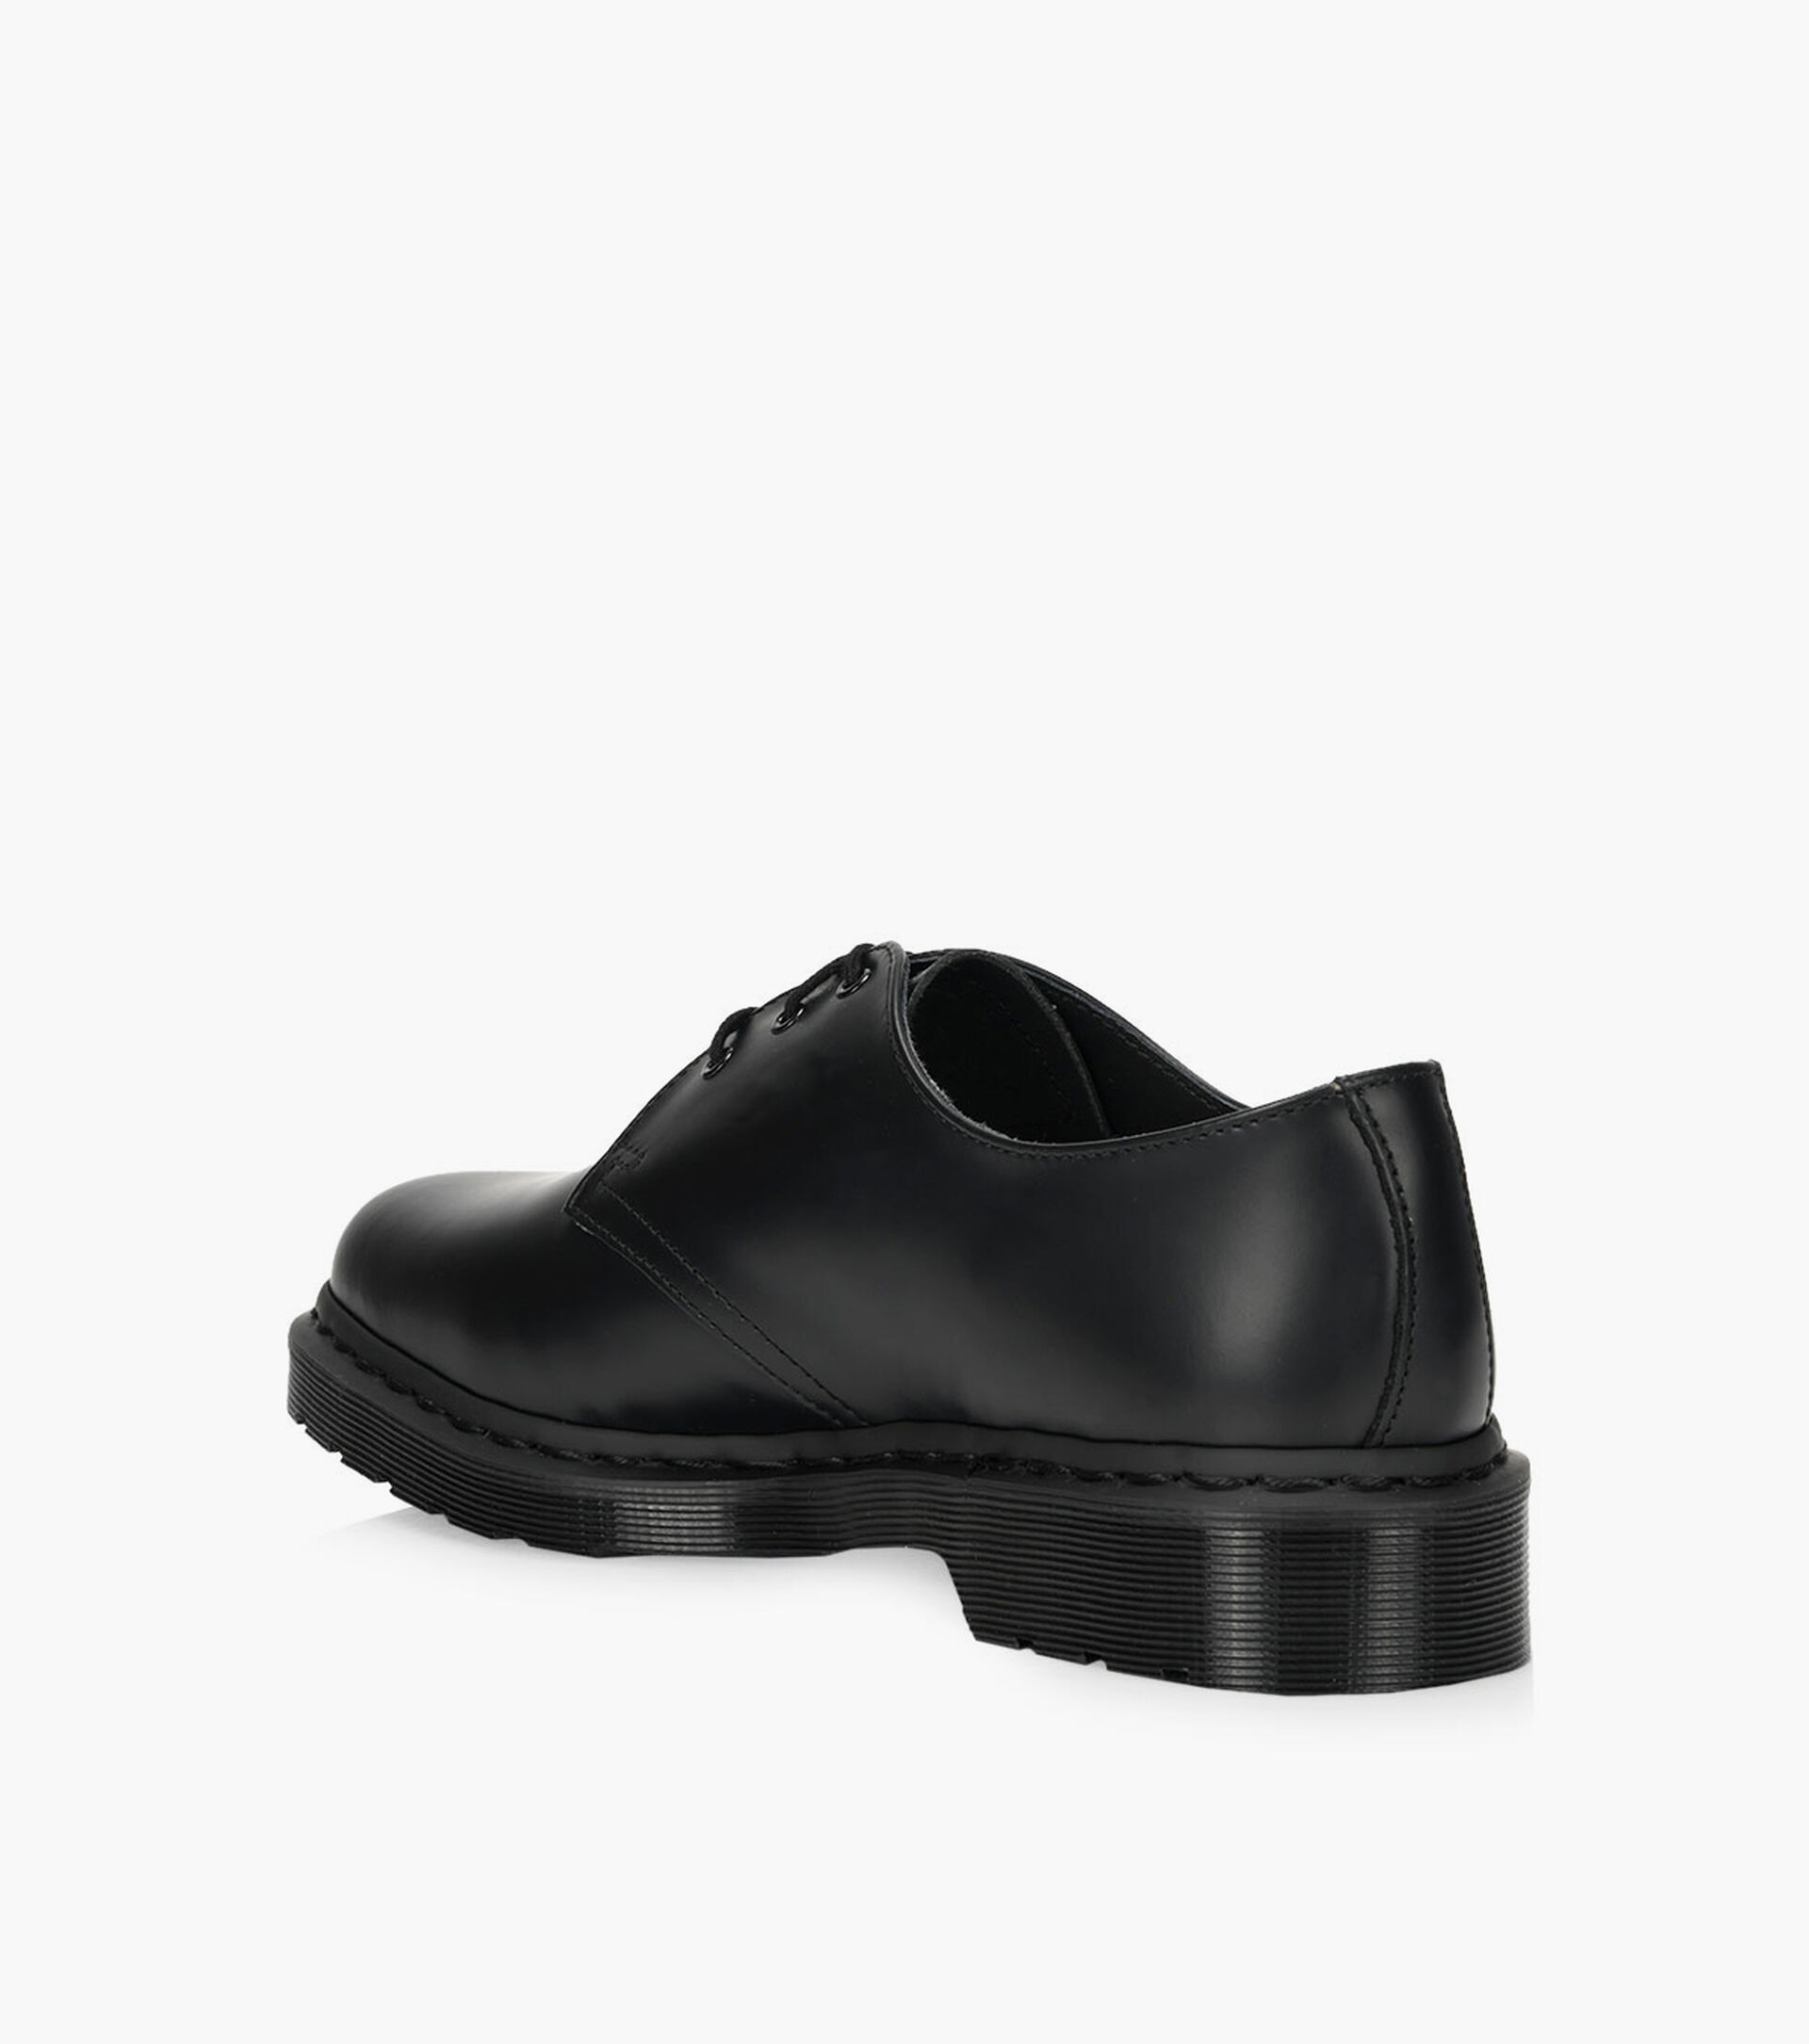 DR. MARTENS 1461 MONO OXFORD - Black Leather | Browns Shoes